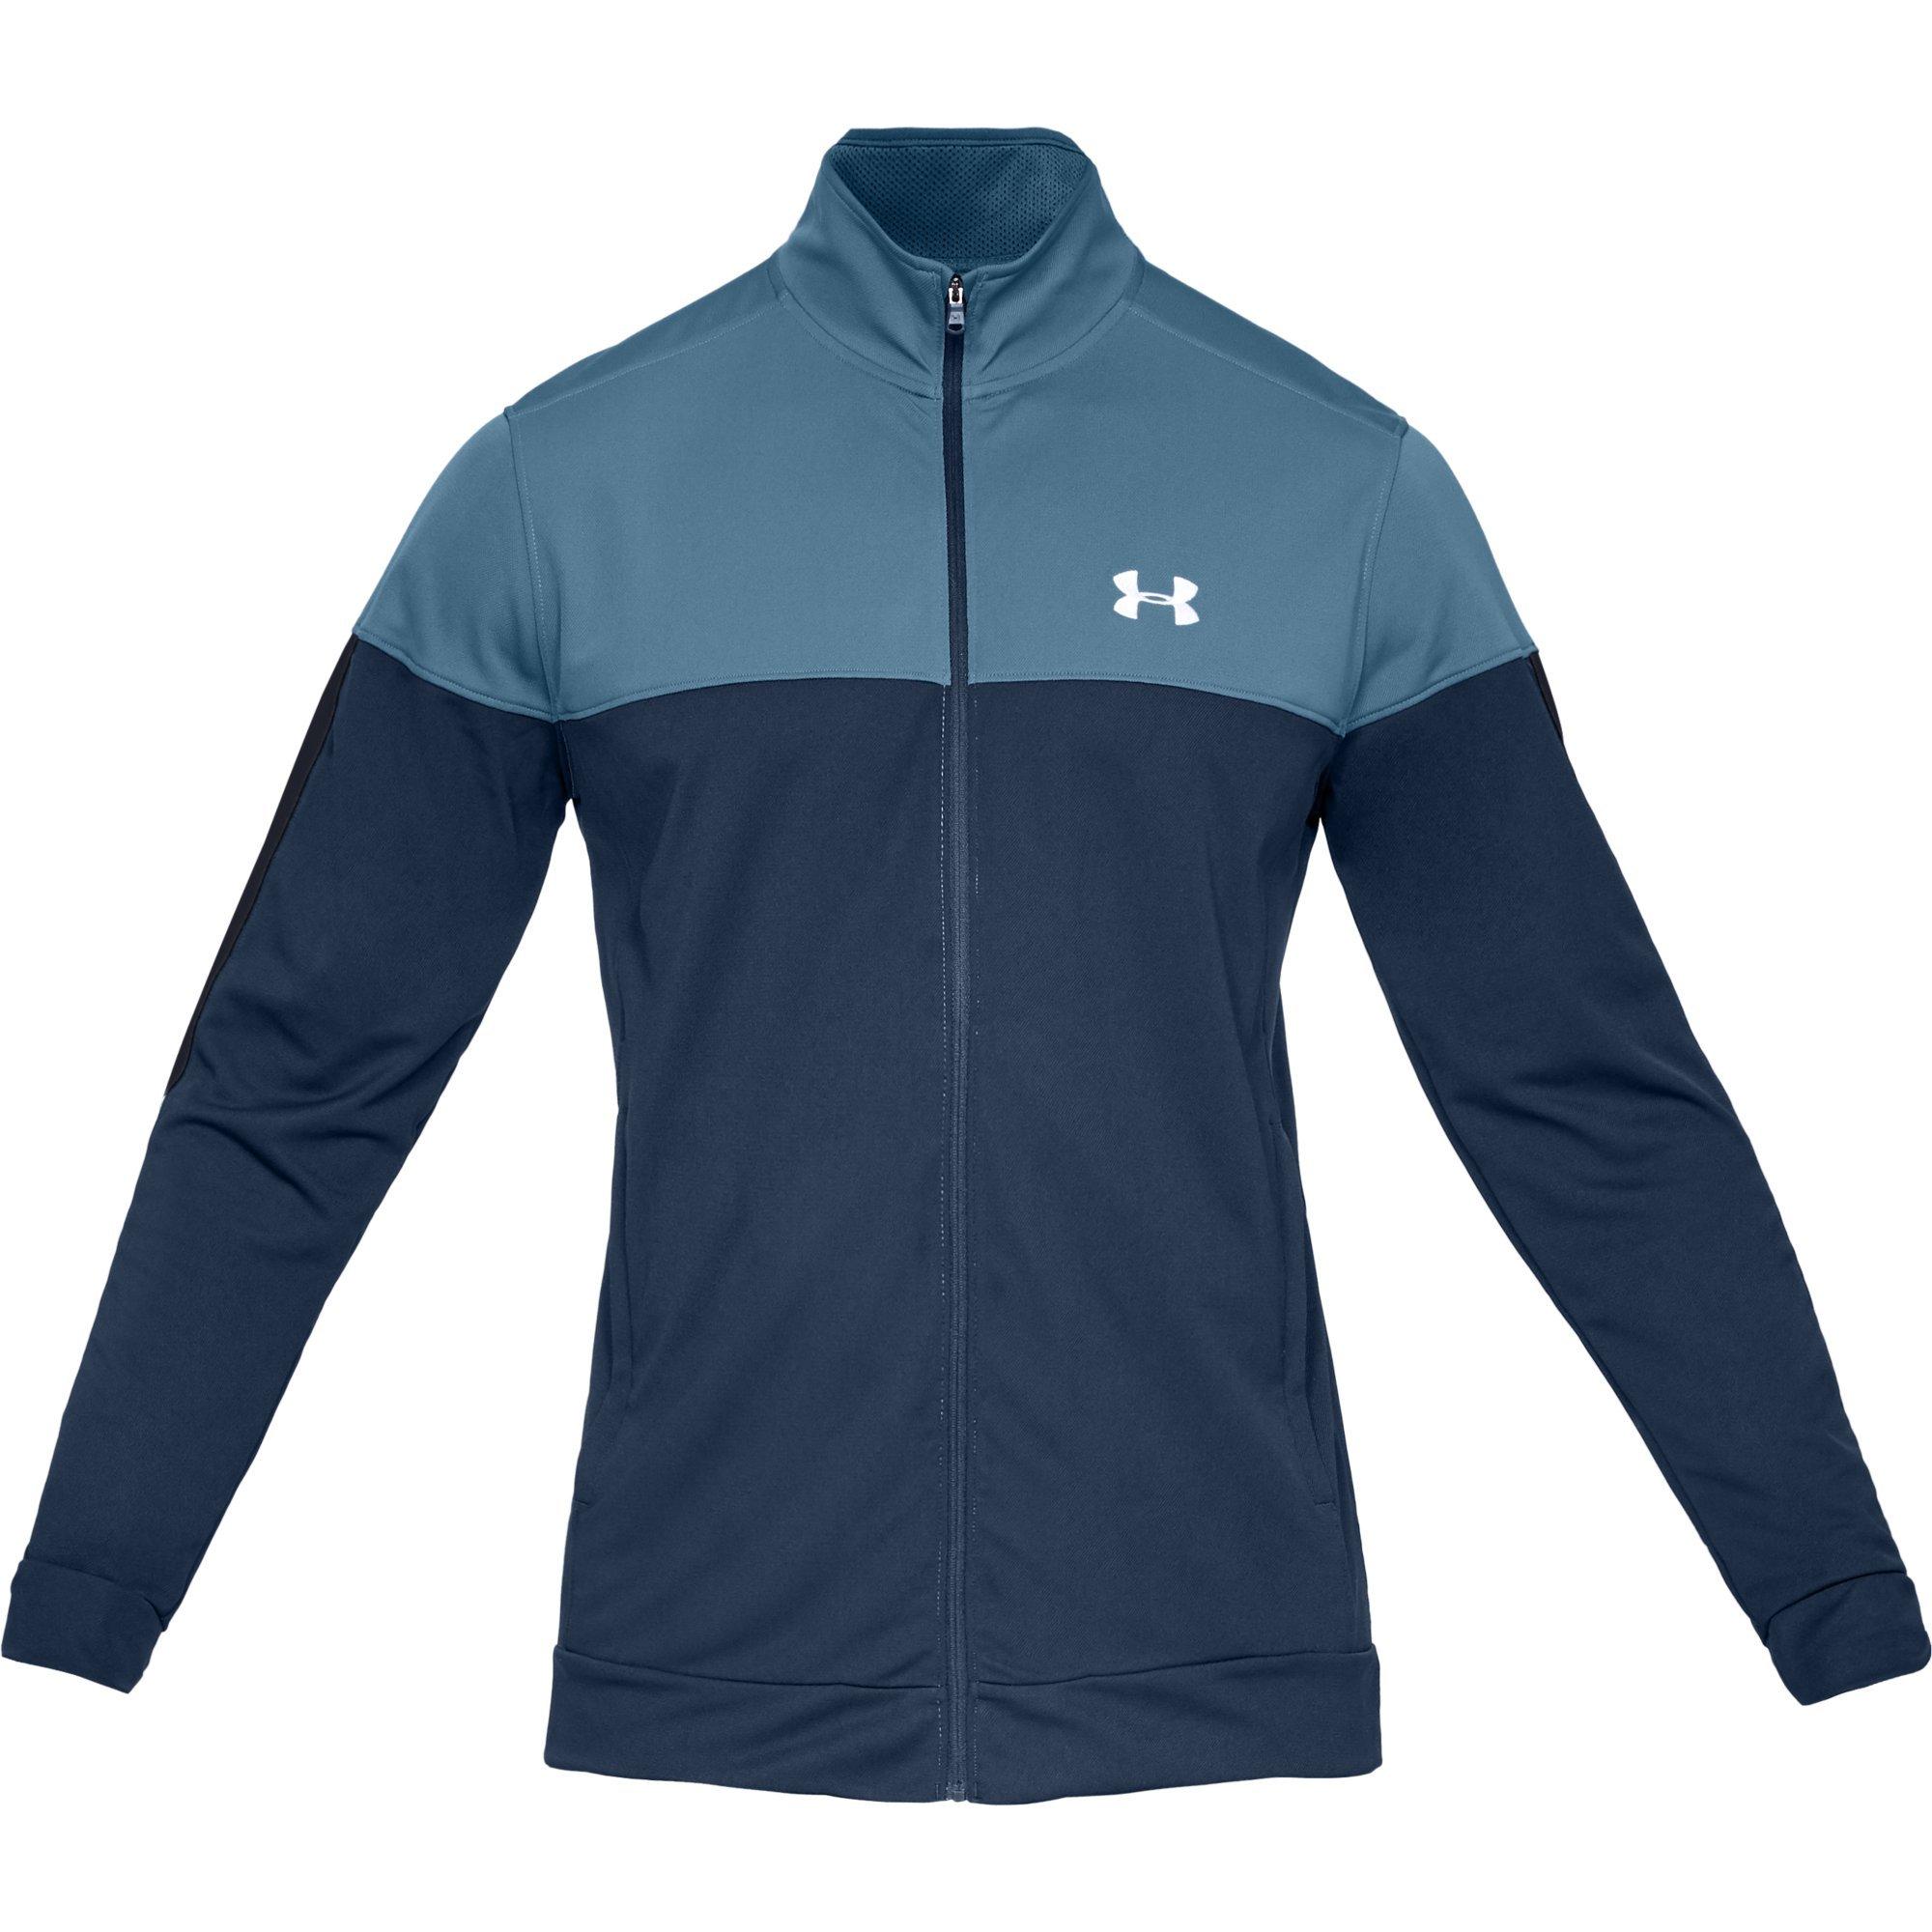 Under Armour Sportstyle Pique Track Jacket Comfortable Tight-Fit Running Jacket Men Lightweight and Breathable Men/’s Fleece